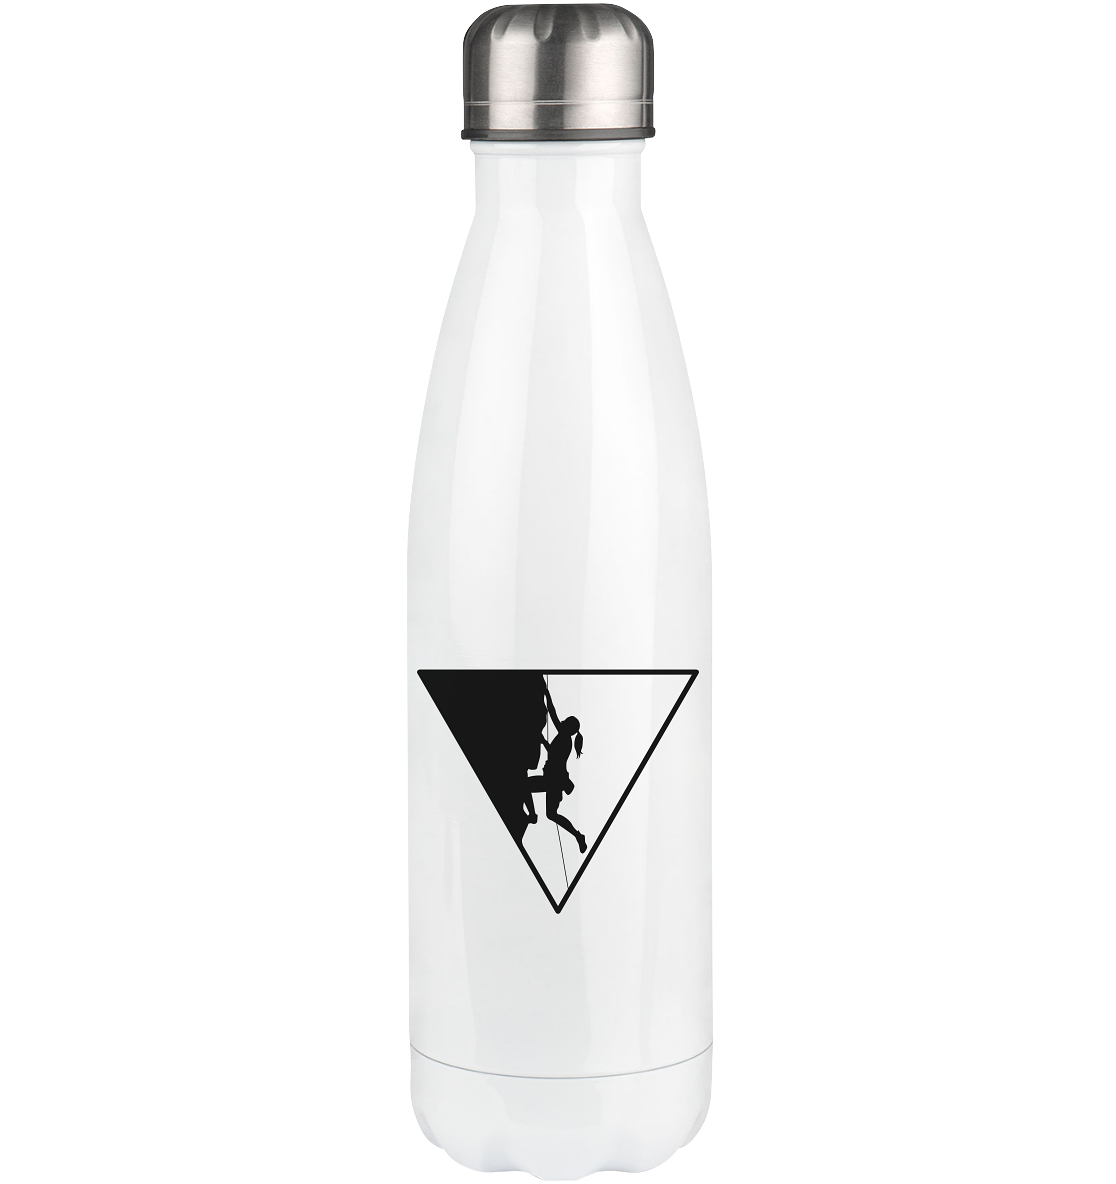 Triangle and Climbing - Edelstahl Thermosflasche klettern 500ml